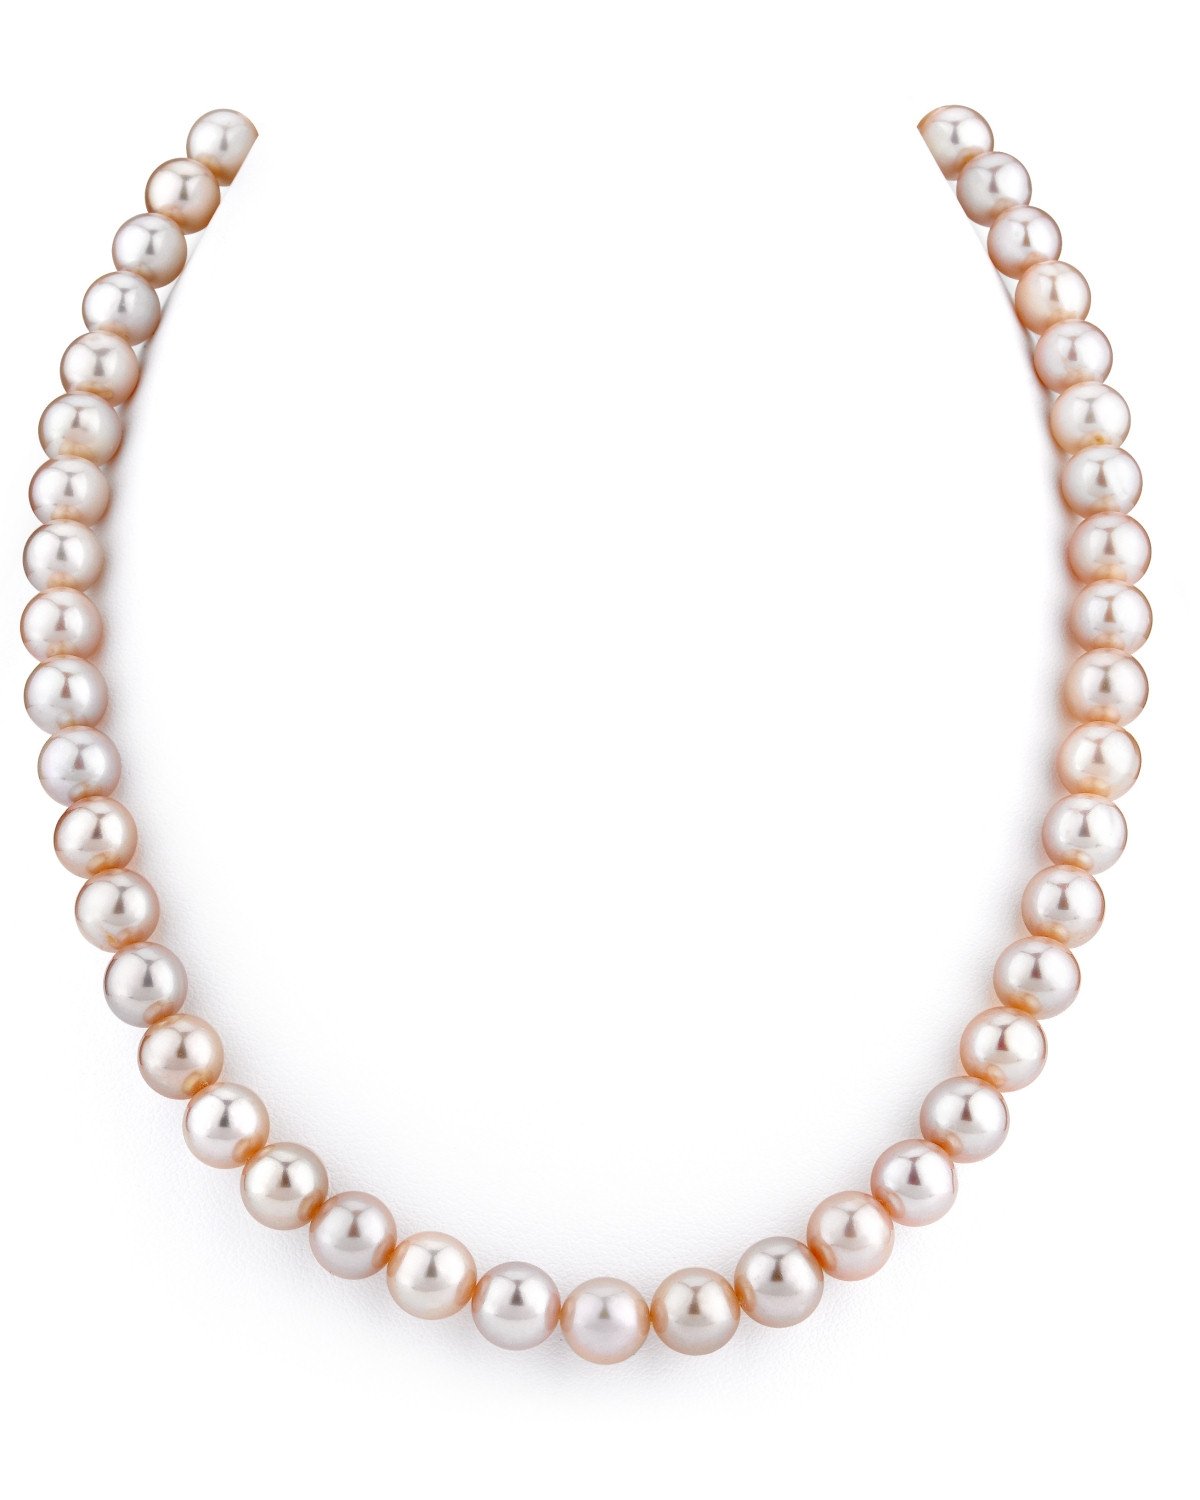 47 Inch Multi-color Freshwater Pearl Necklace from 100Sterling.com